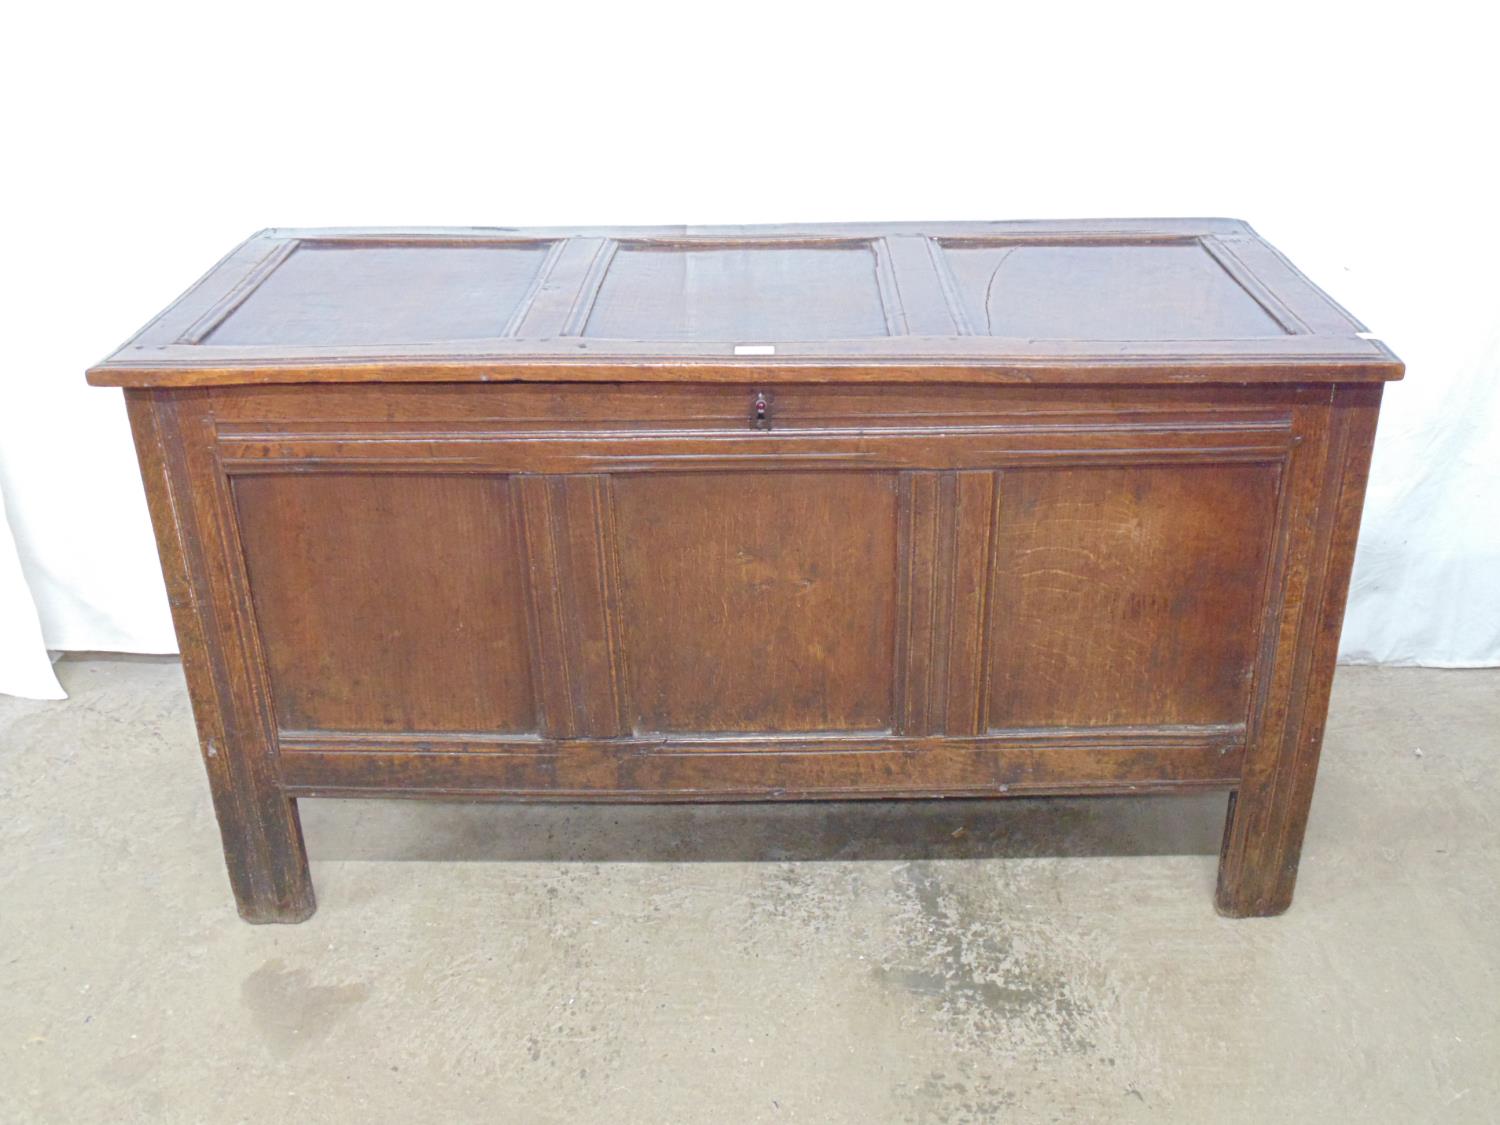 19th century oak coffer having three panel top and front, standing on square legs - 51.25" x 22.5" x